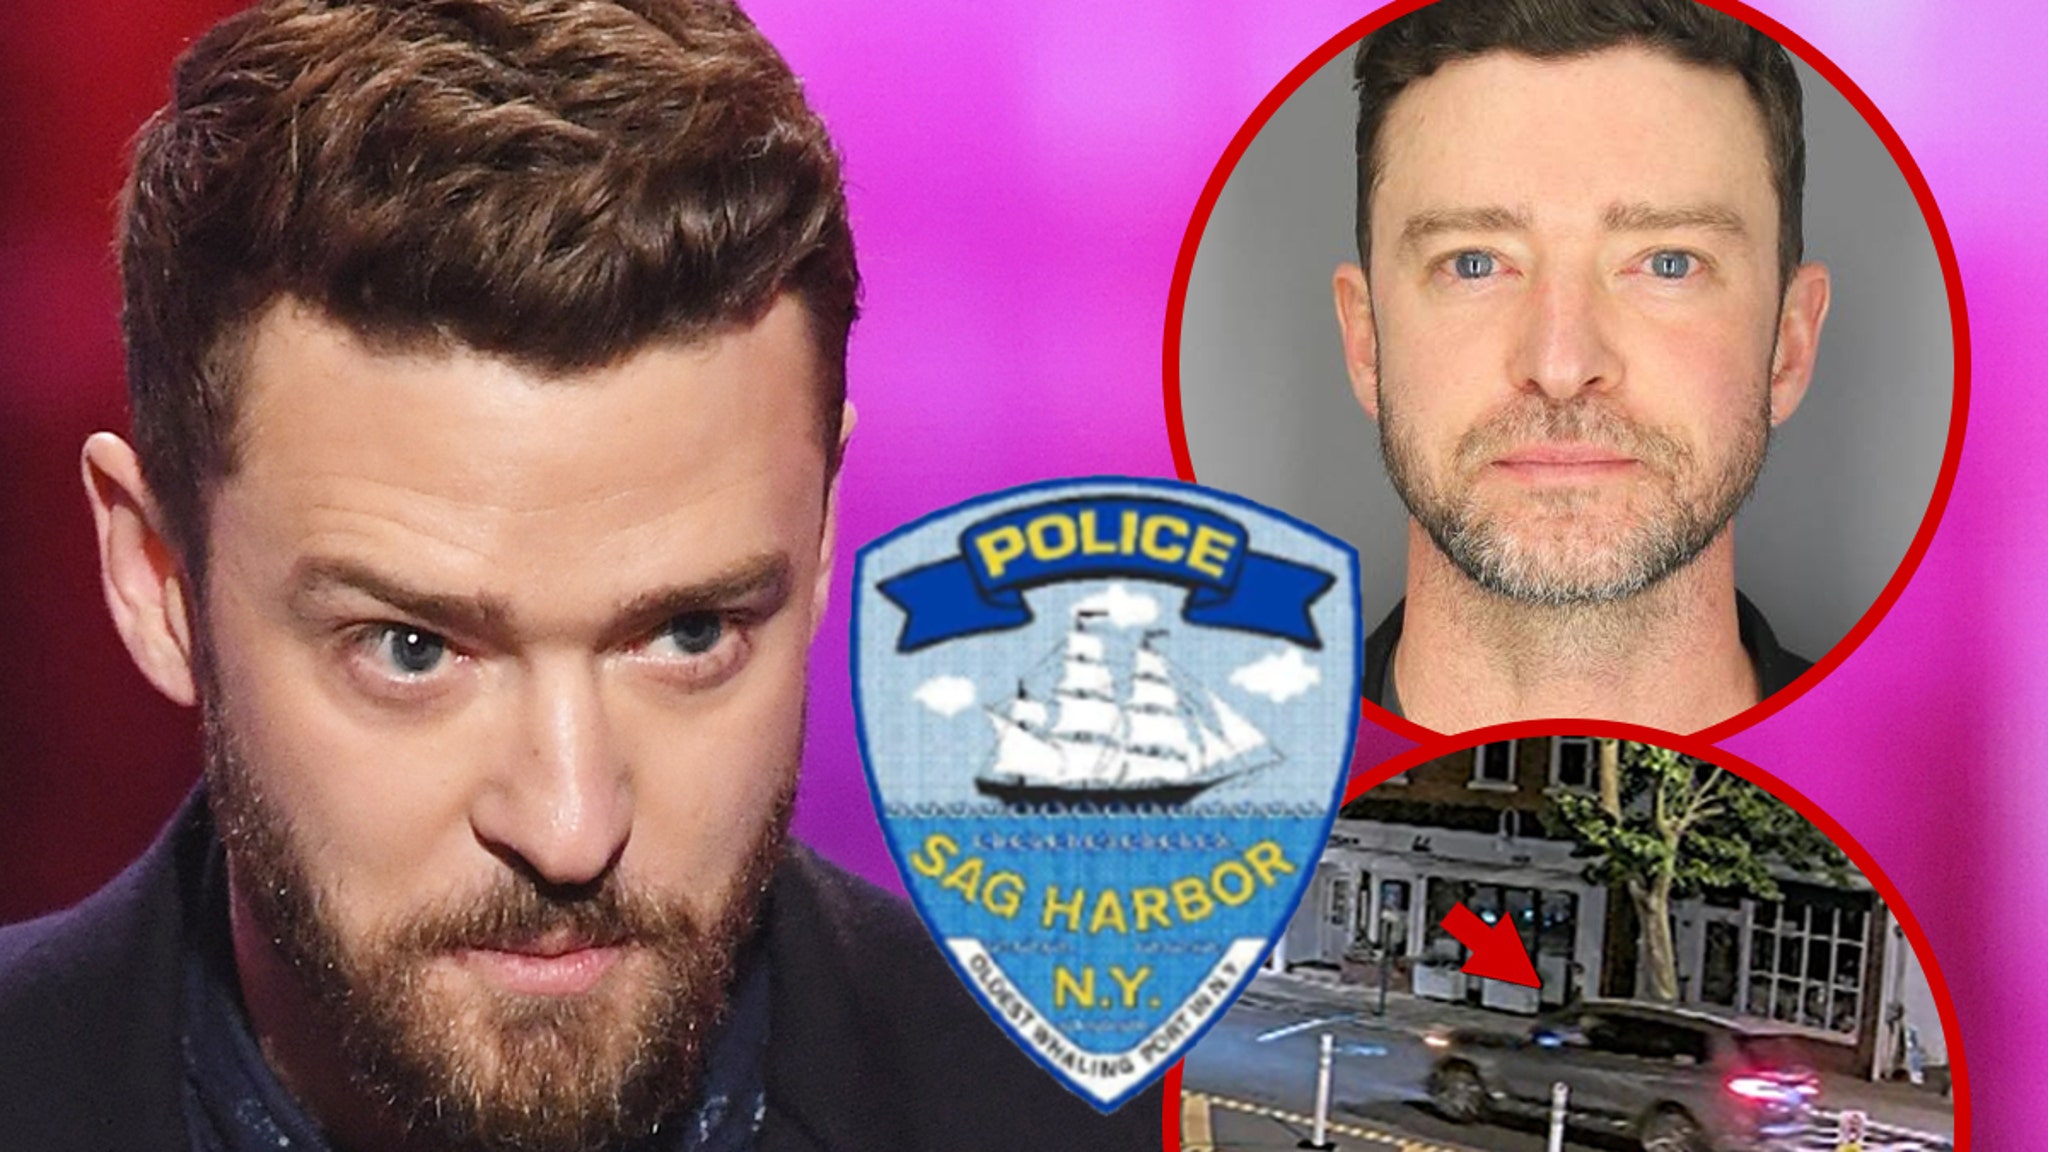 Justin Timberlake DWI Arrest Body Cam Video Won’t Be Released Anytime Soon